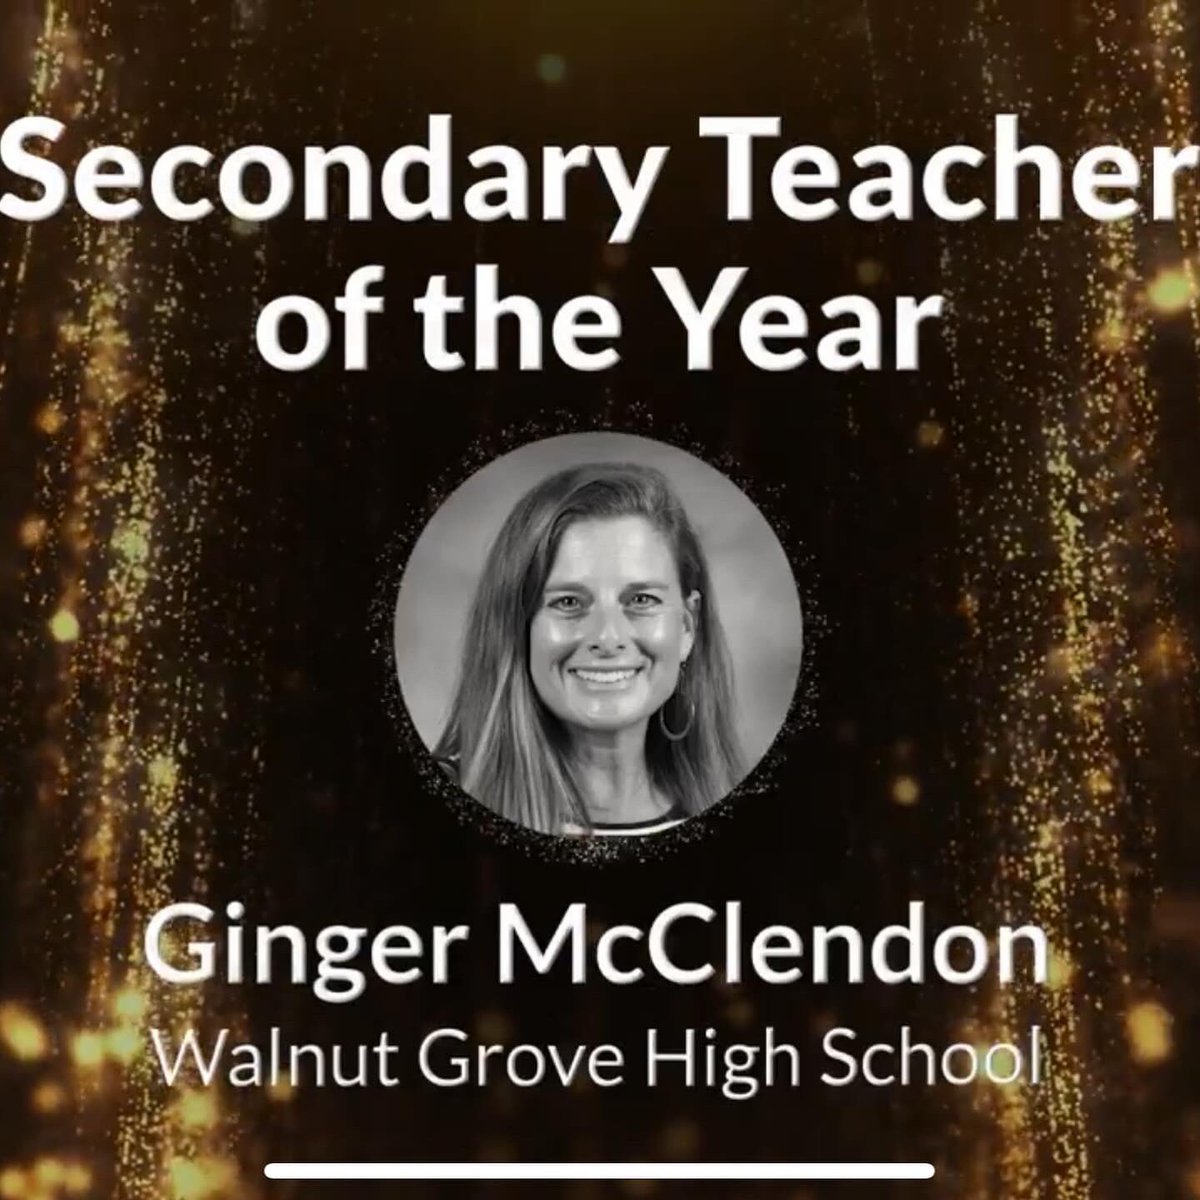 Thank you @ProsperISD I feel like Wayne and Garth “I’m not worthy” When you work with the cream of the crop and you get a nod in your direction, it is truly humbling. I 💙my talented students & I have the biggest cheering squad behind the scenes. Bring on the ugly cry…